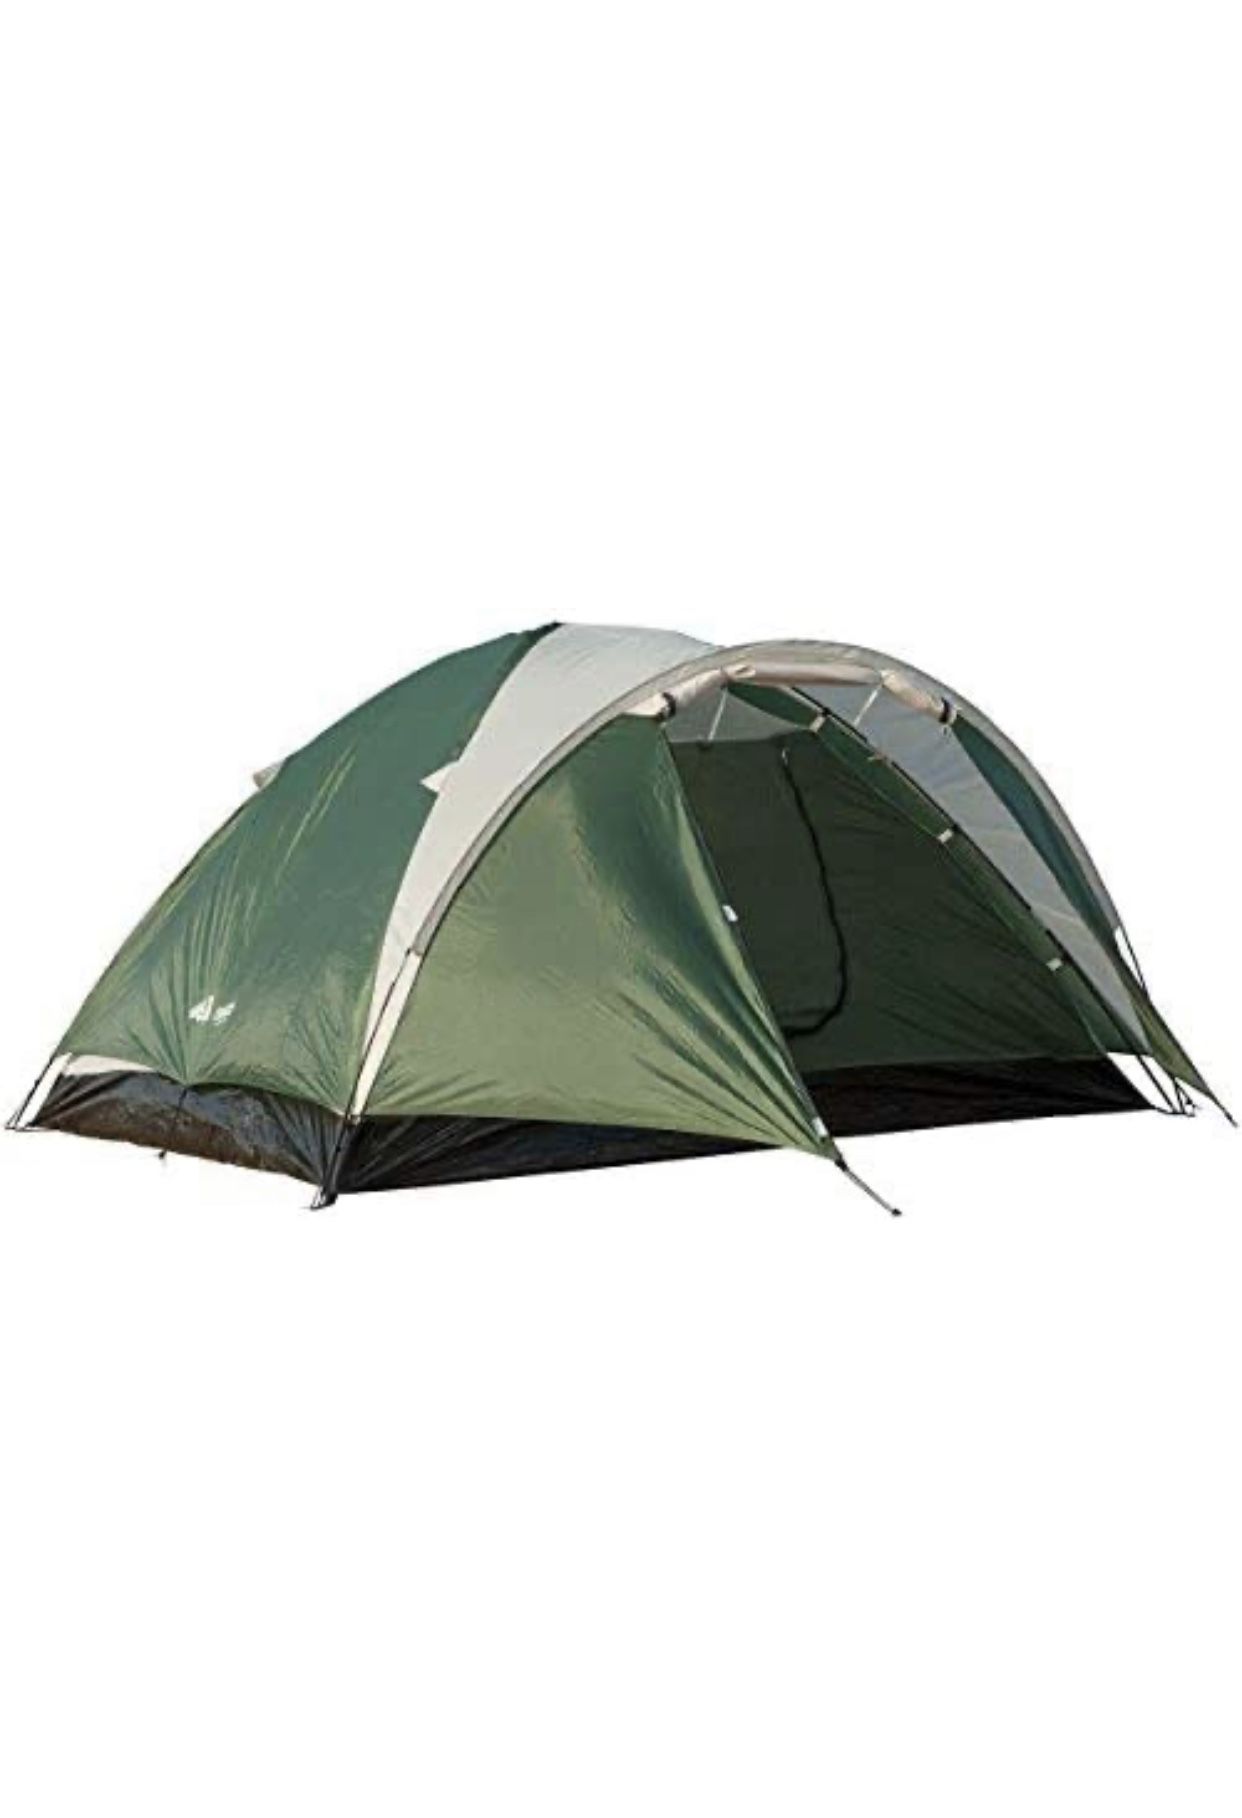 3 Person Camping Tents 4-Season Double Layers Lightweight Family Tent Easy Setup for Backpacking Hiking Traveling